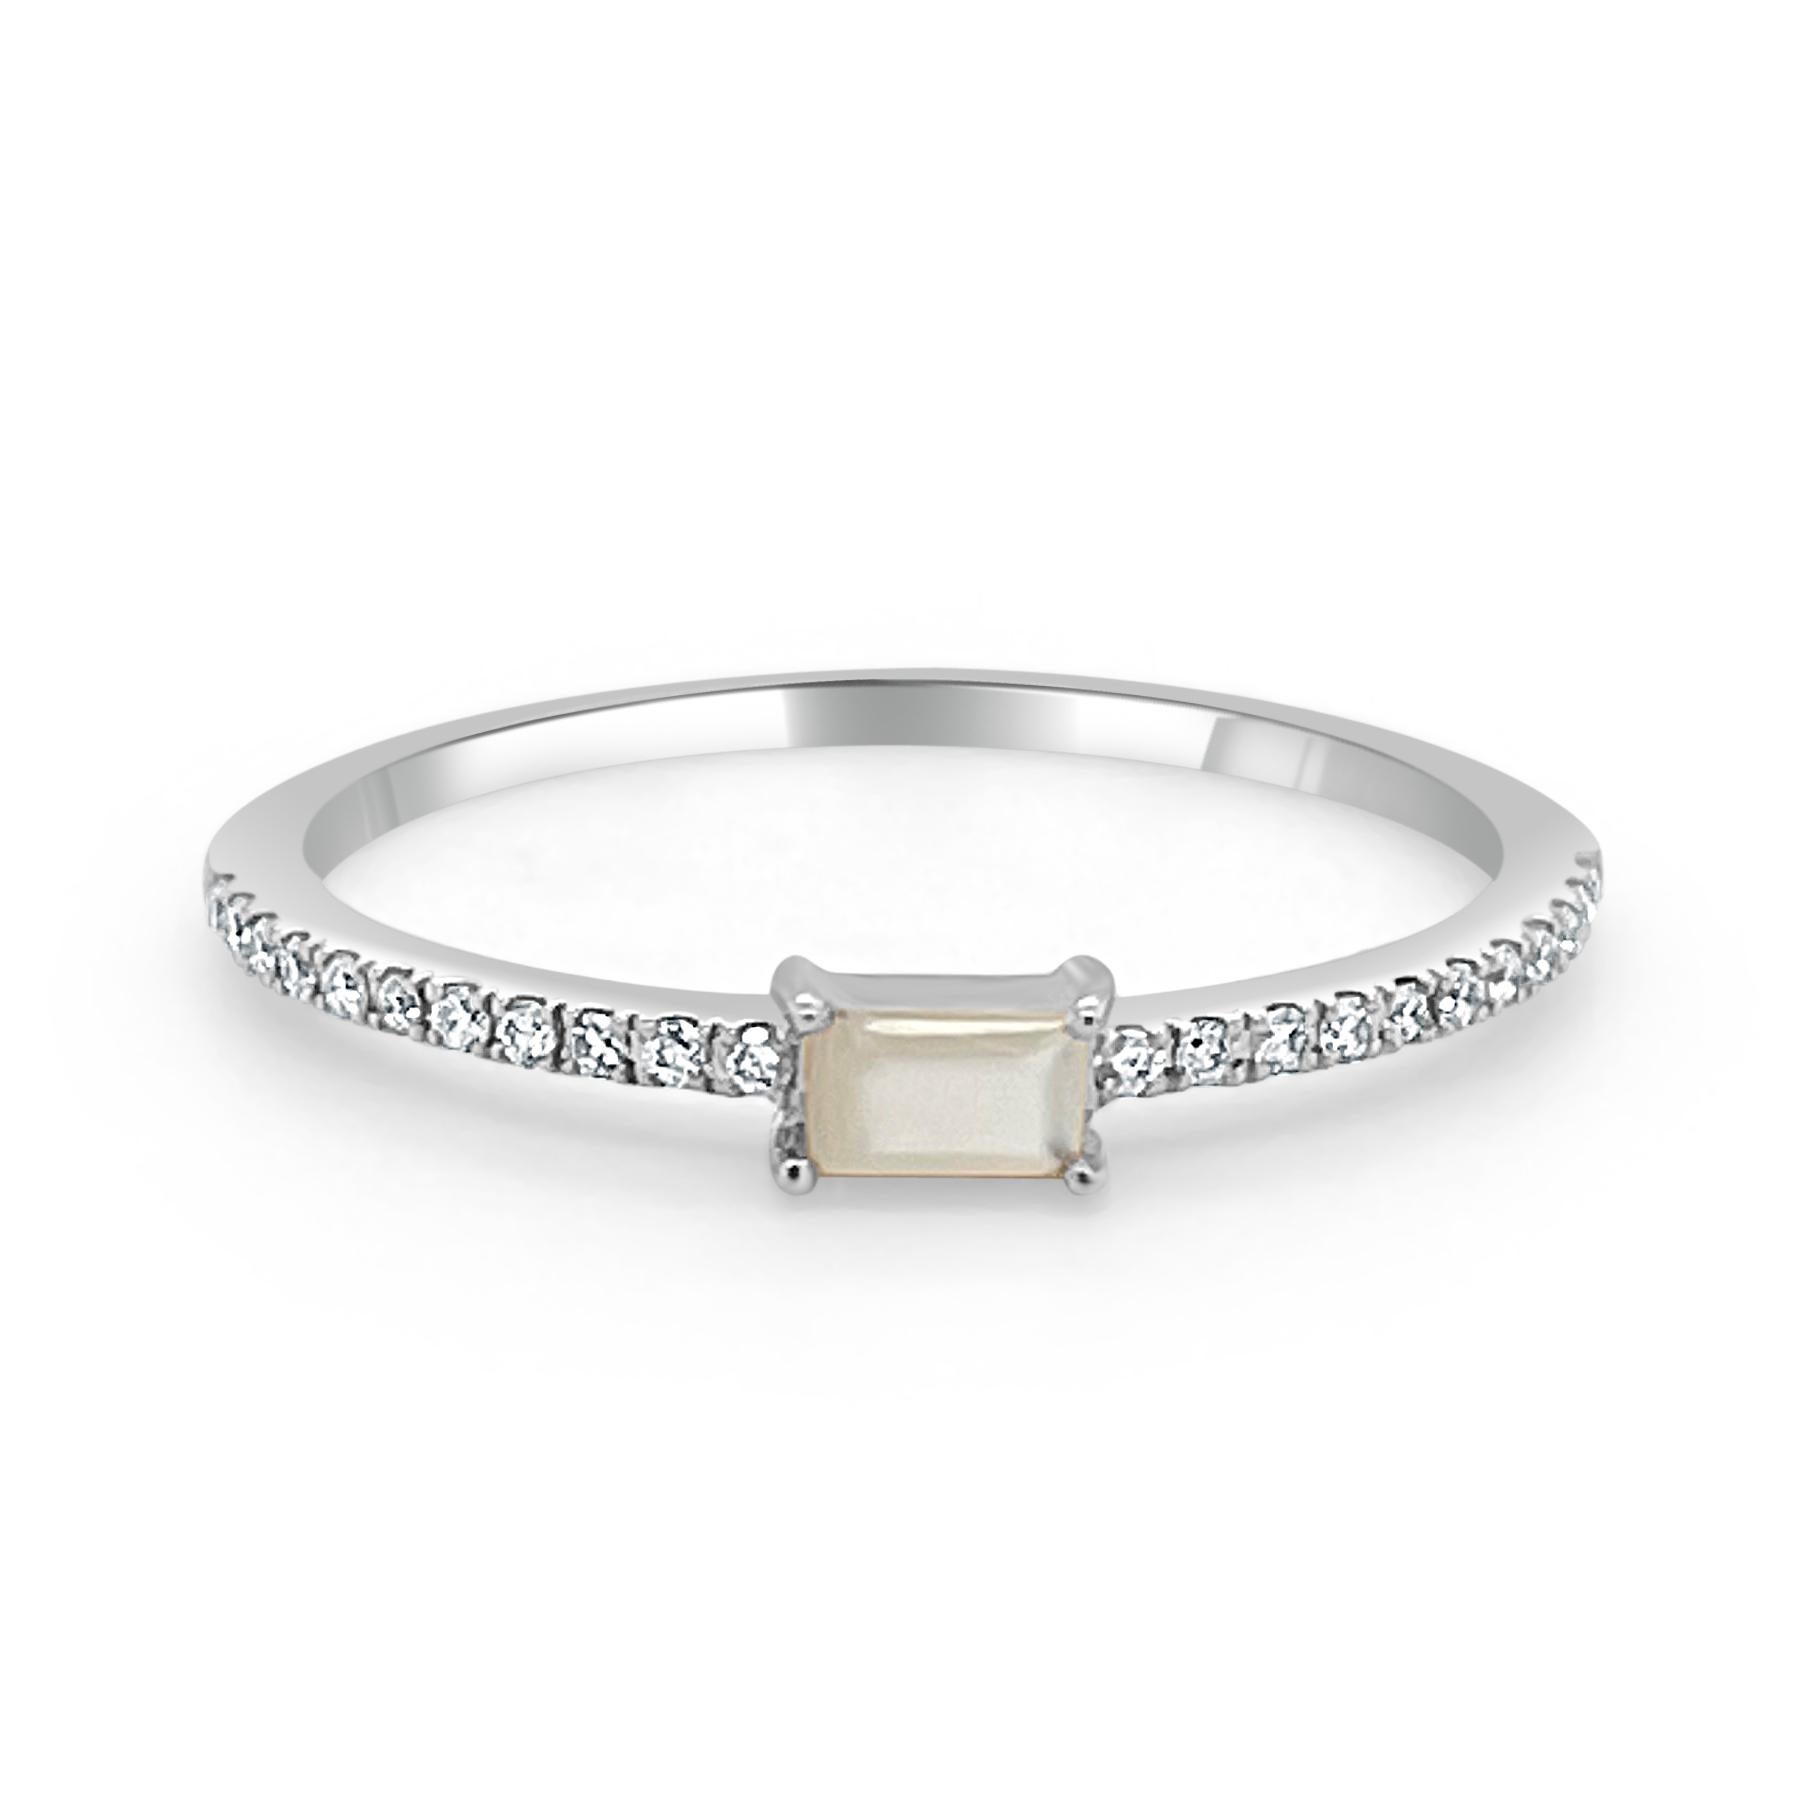 Charming and Elusive Design - This stackable ring features a 14k gold band, a baguette shaped gorgeous pearl approximately 0.14 cts, and round diamonds approximately 0.09 cts, 
Measurements for ring size: The finger Size of the ring is 6.5 and your